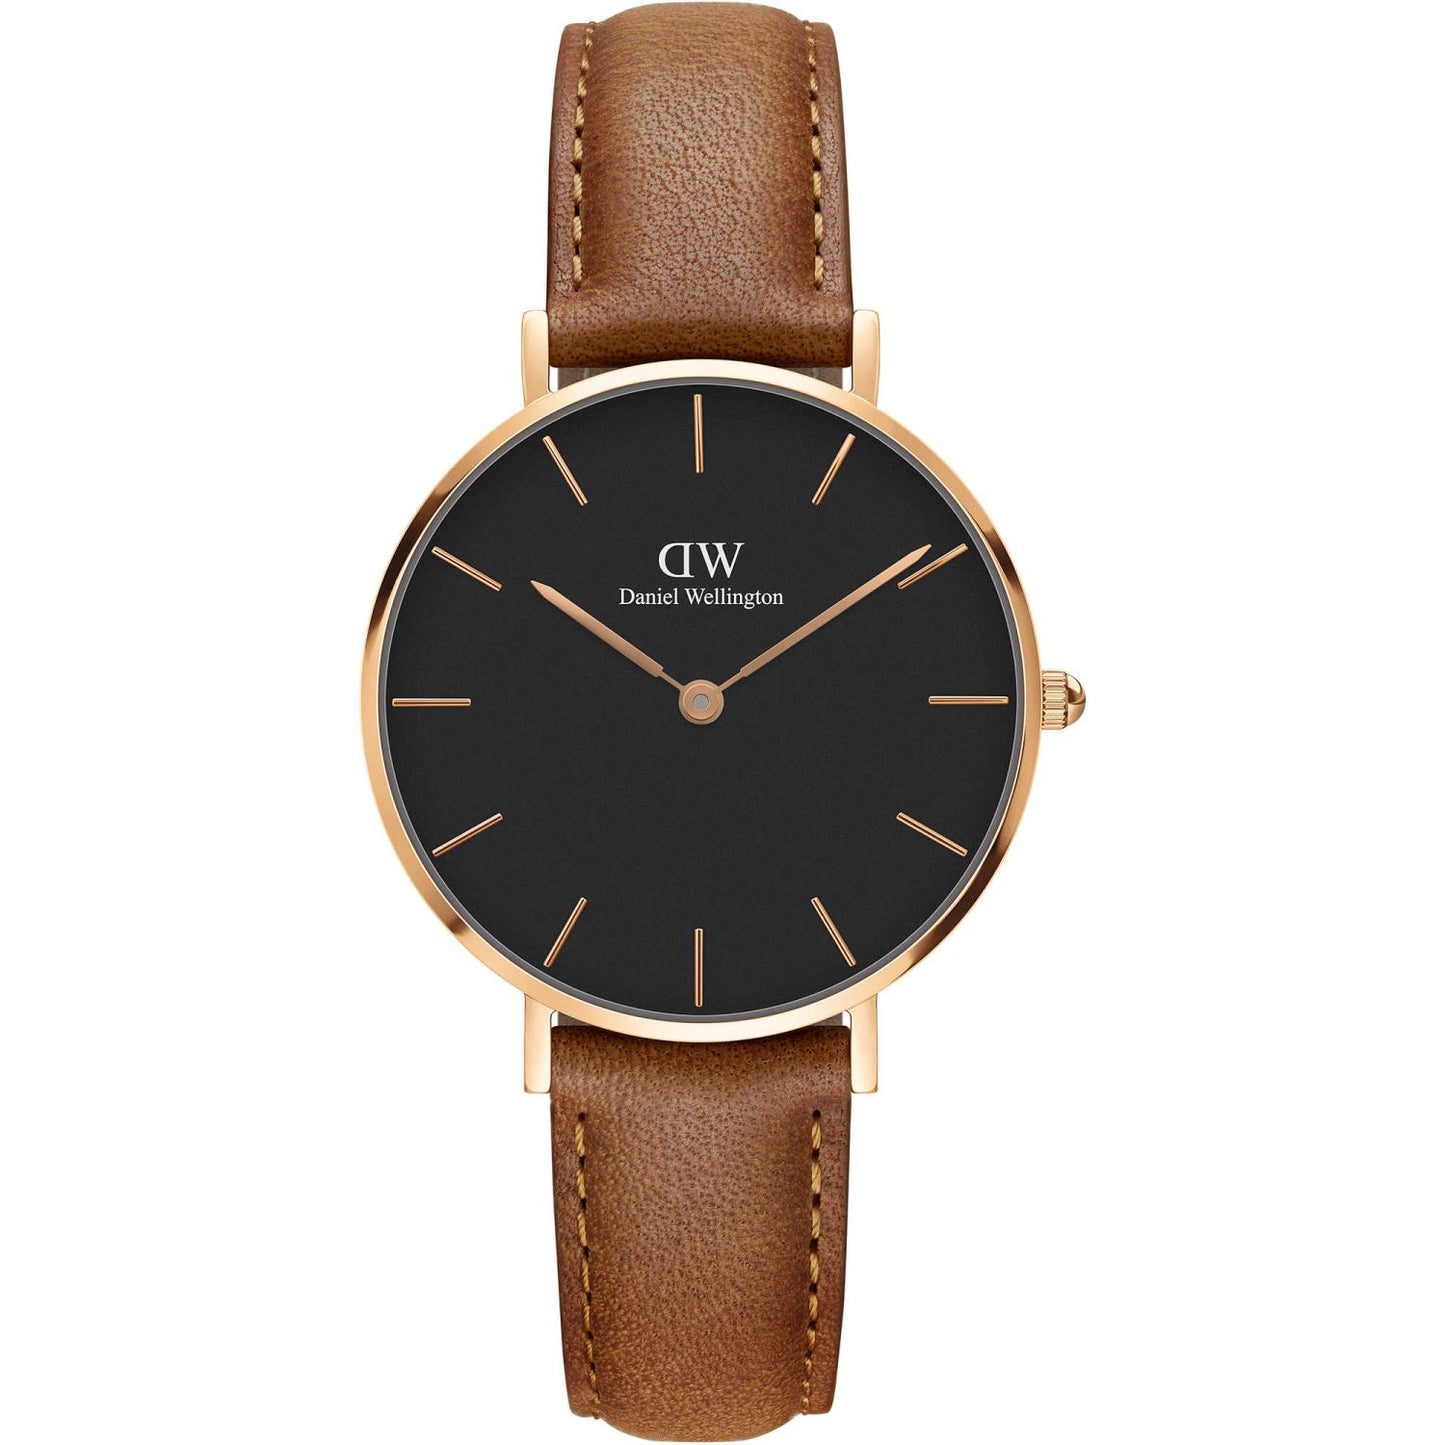 DW Petite Durham 32mm - London Time Watches 